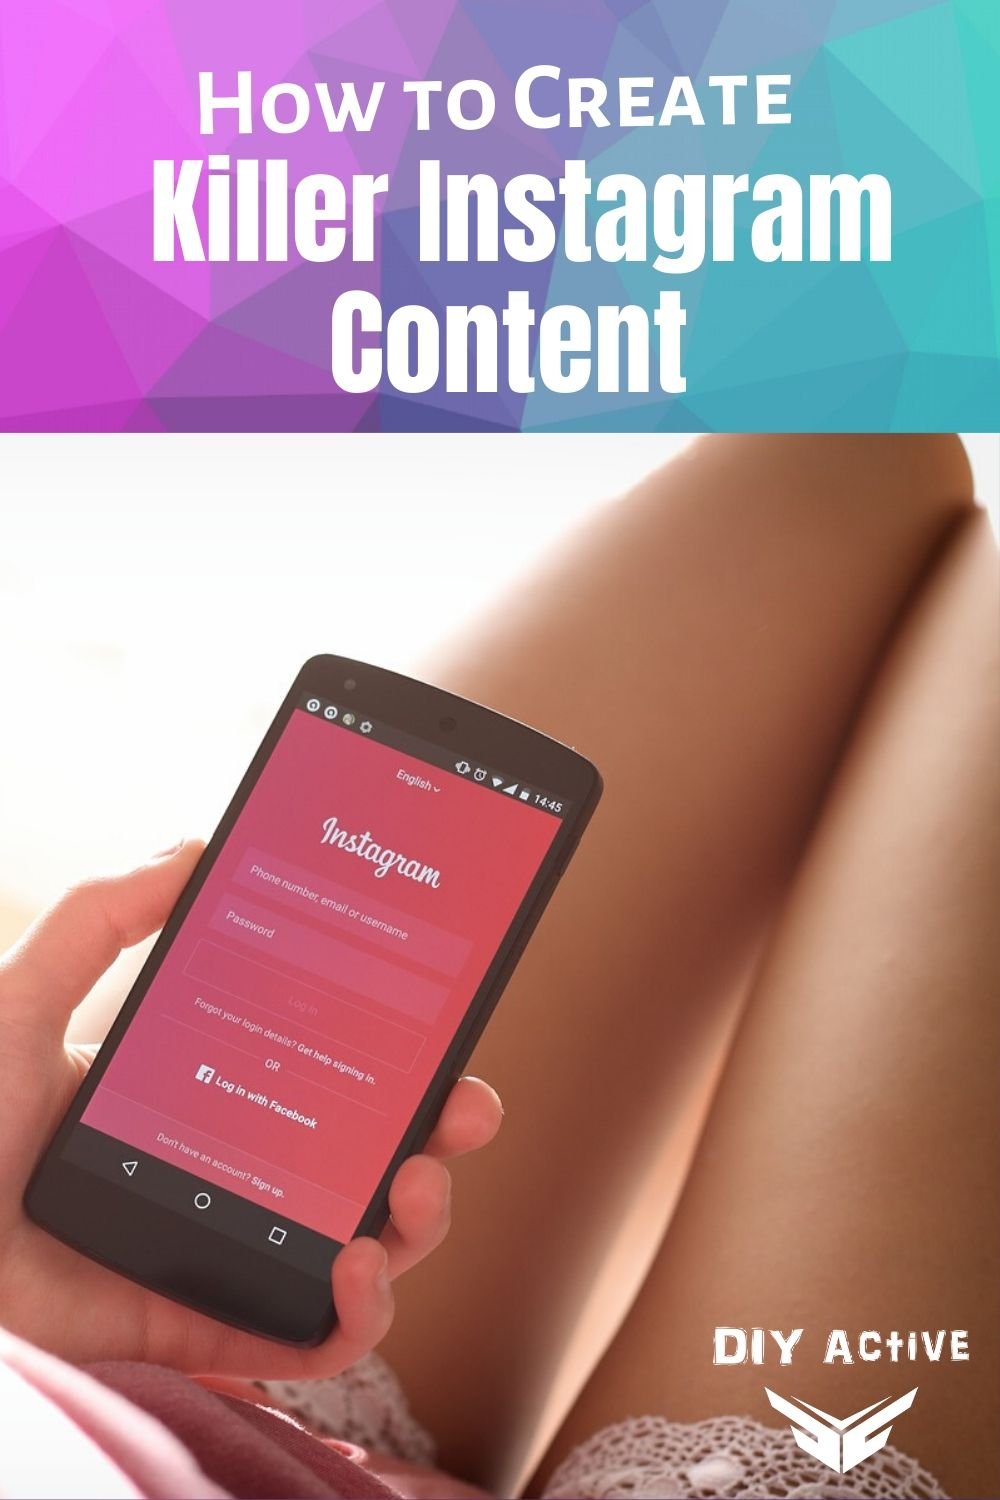 How to Create Amazing Instagram Content That Boosts Your Brand